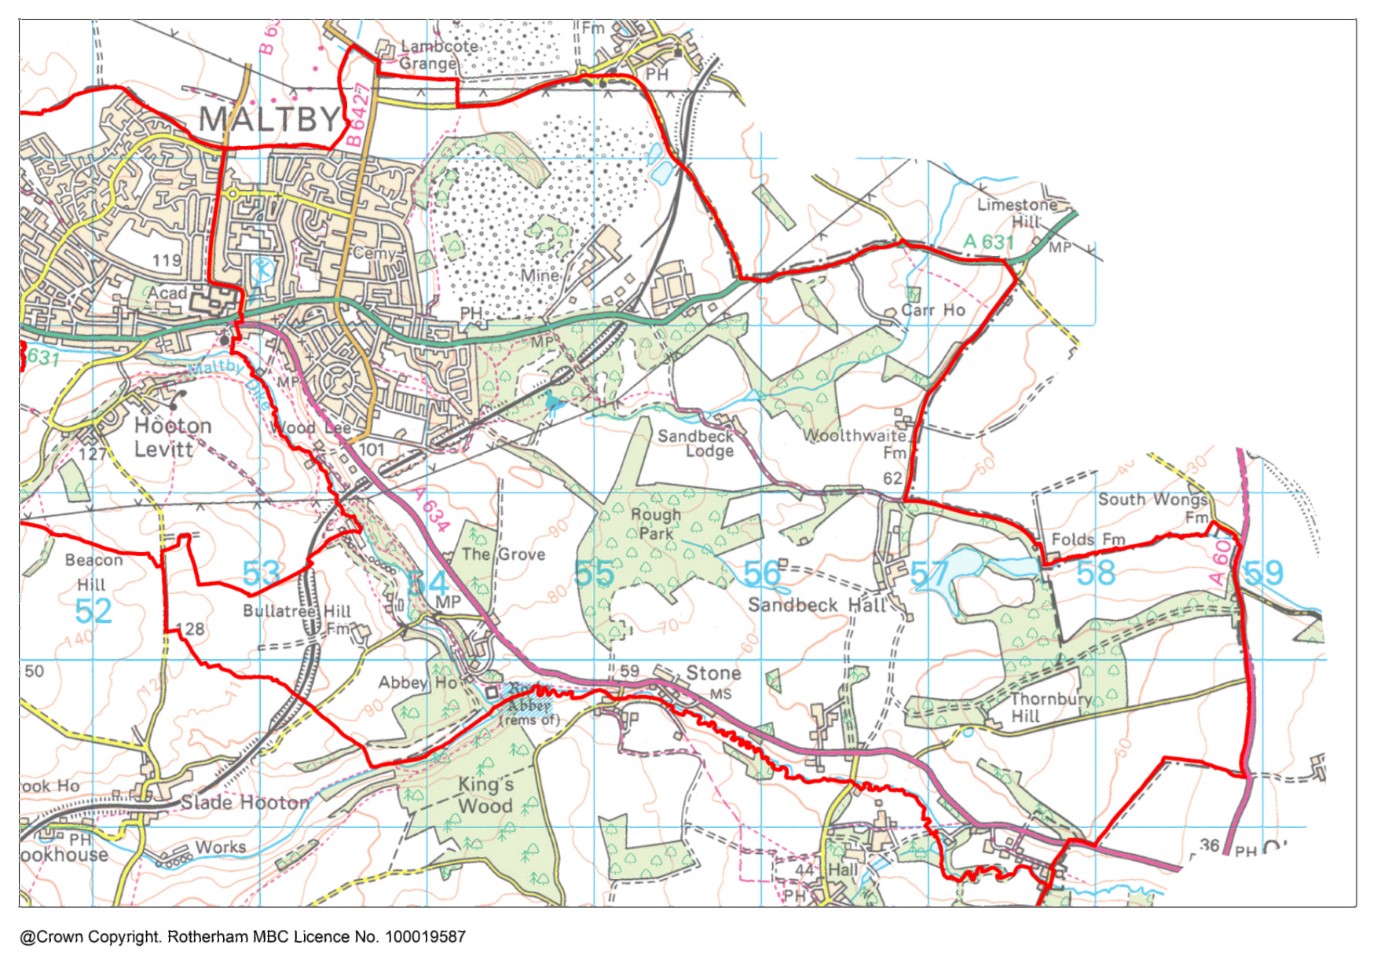 Maltby East ward map